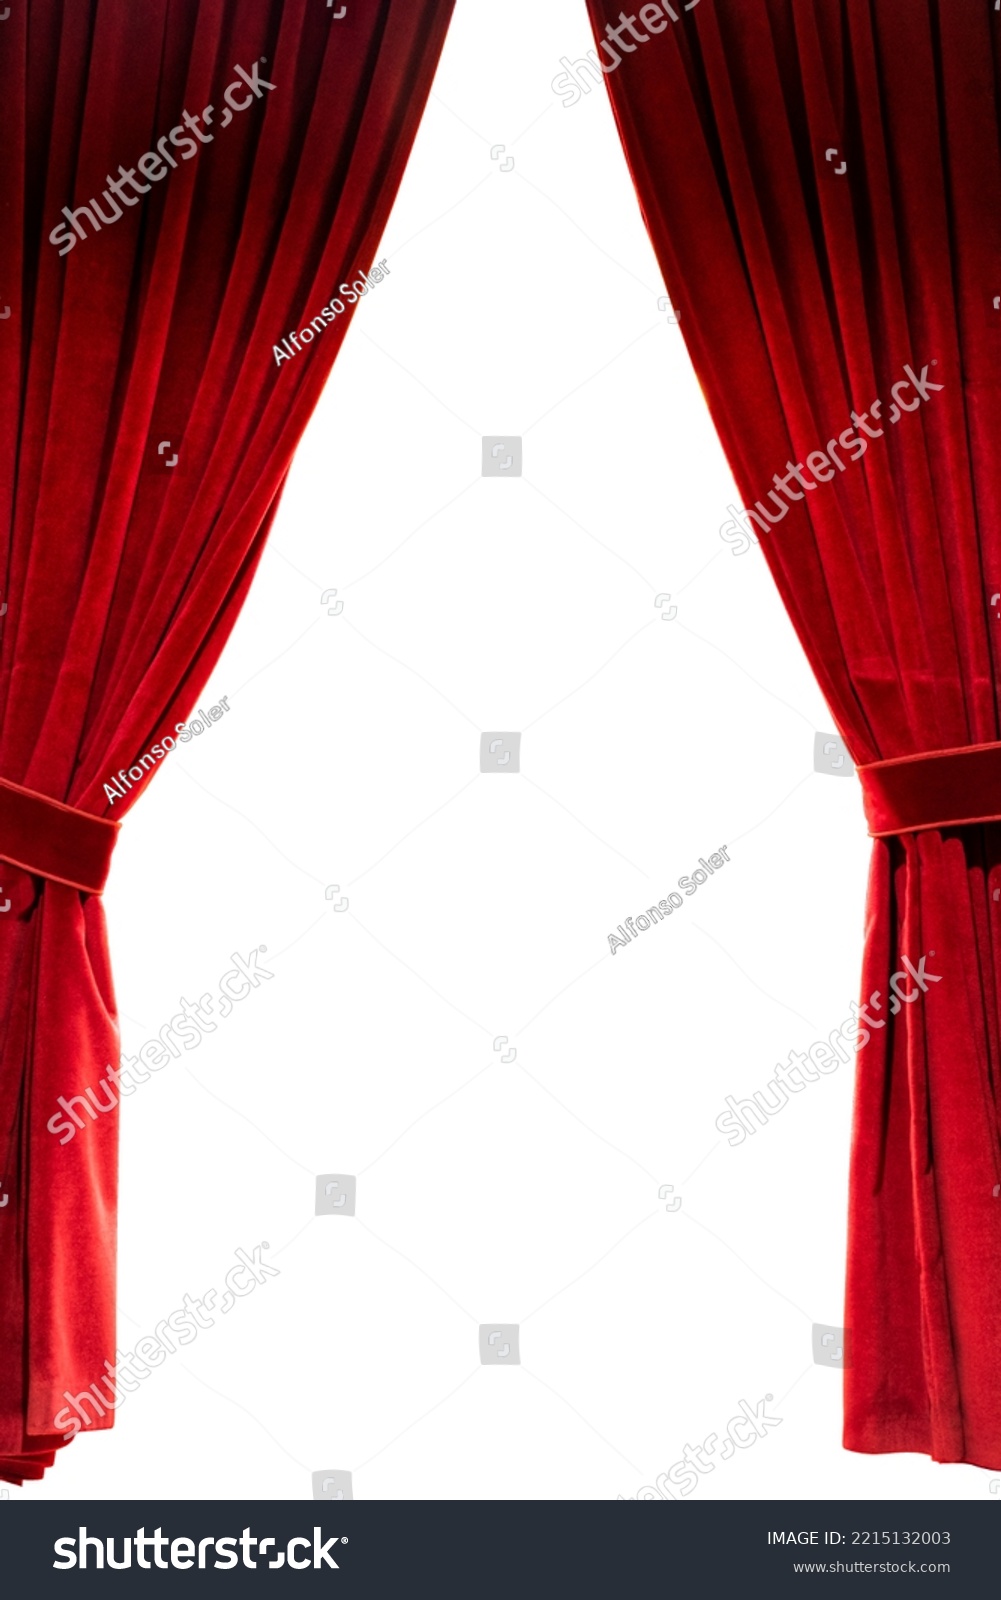 Red theater curtain. Theater curtain with white background. #2215132003